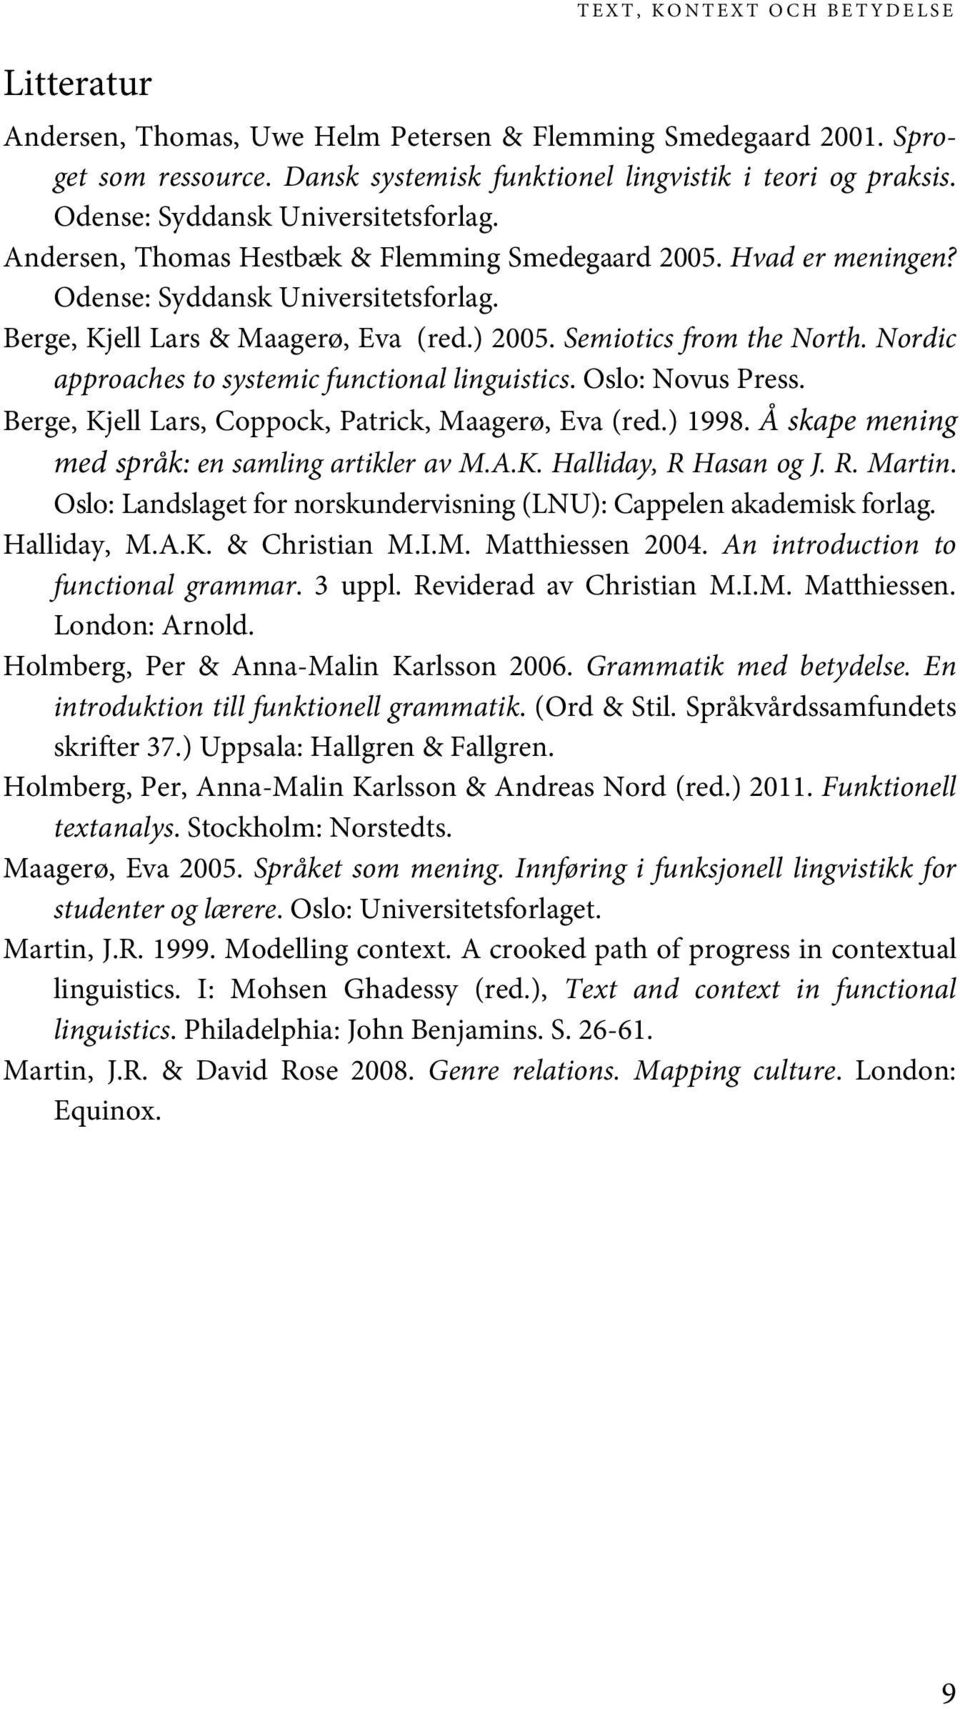 Semiotics from the North. Nordic approaches to systemic functional linguistics. Oslo: Novus Press. Berge, Kjell Lars, Coppock, Patrick, Maagerø, Eva (red.) 1998.